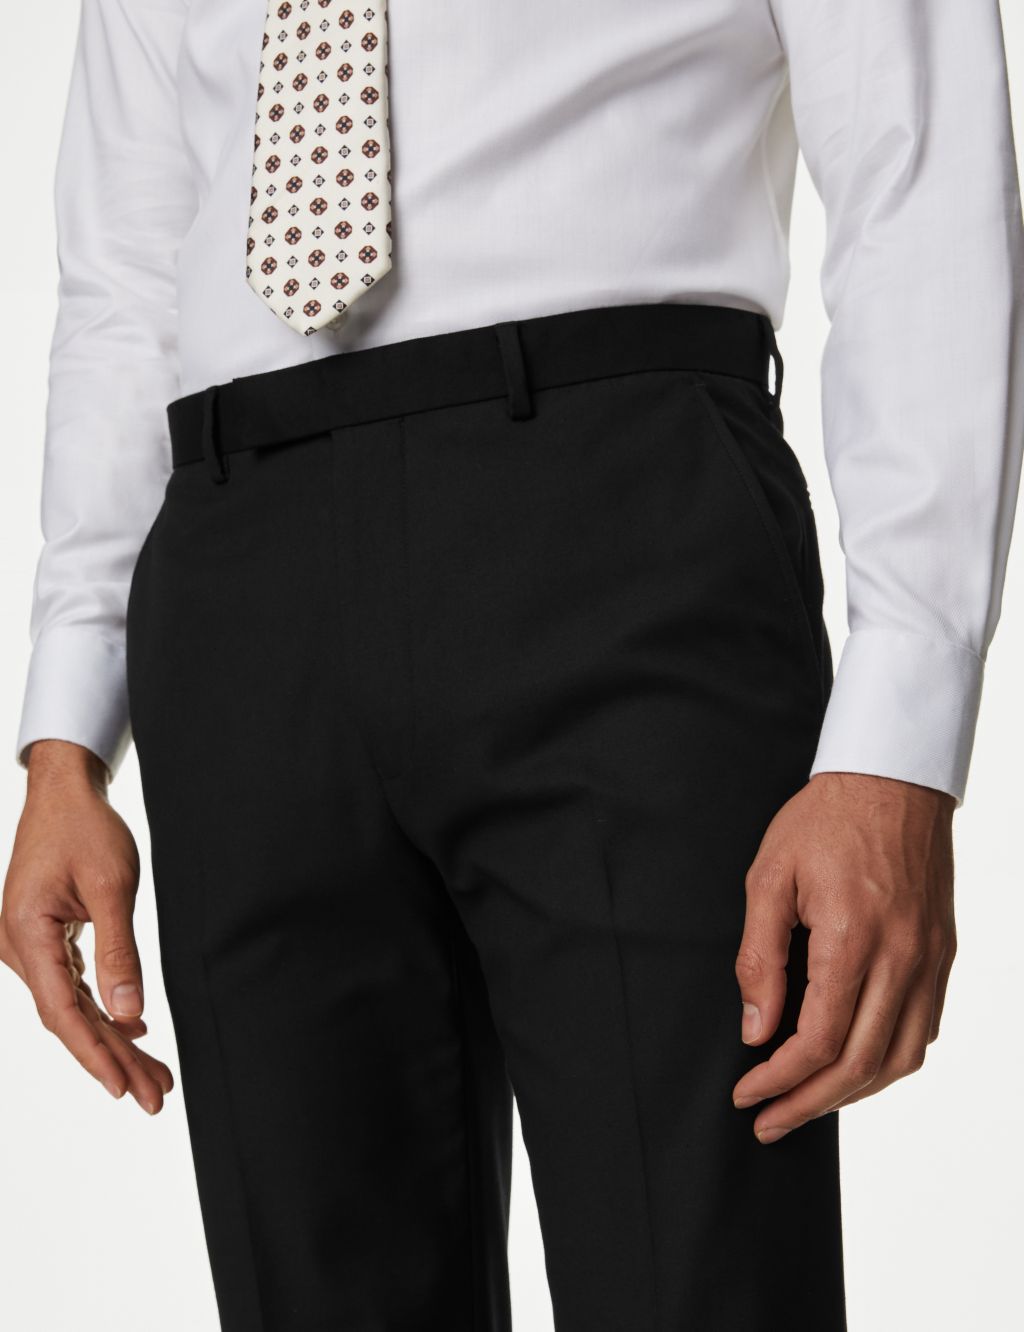 Regular Fit Stretch Suit Trousers image 3